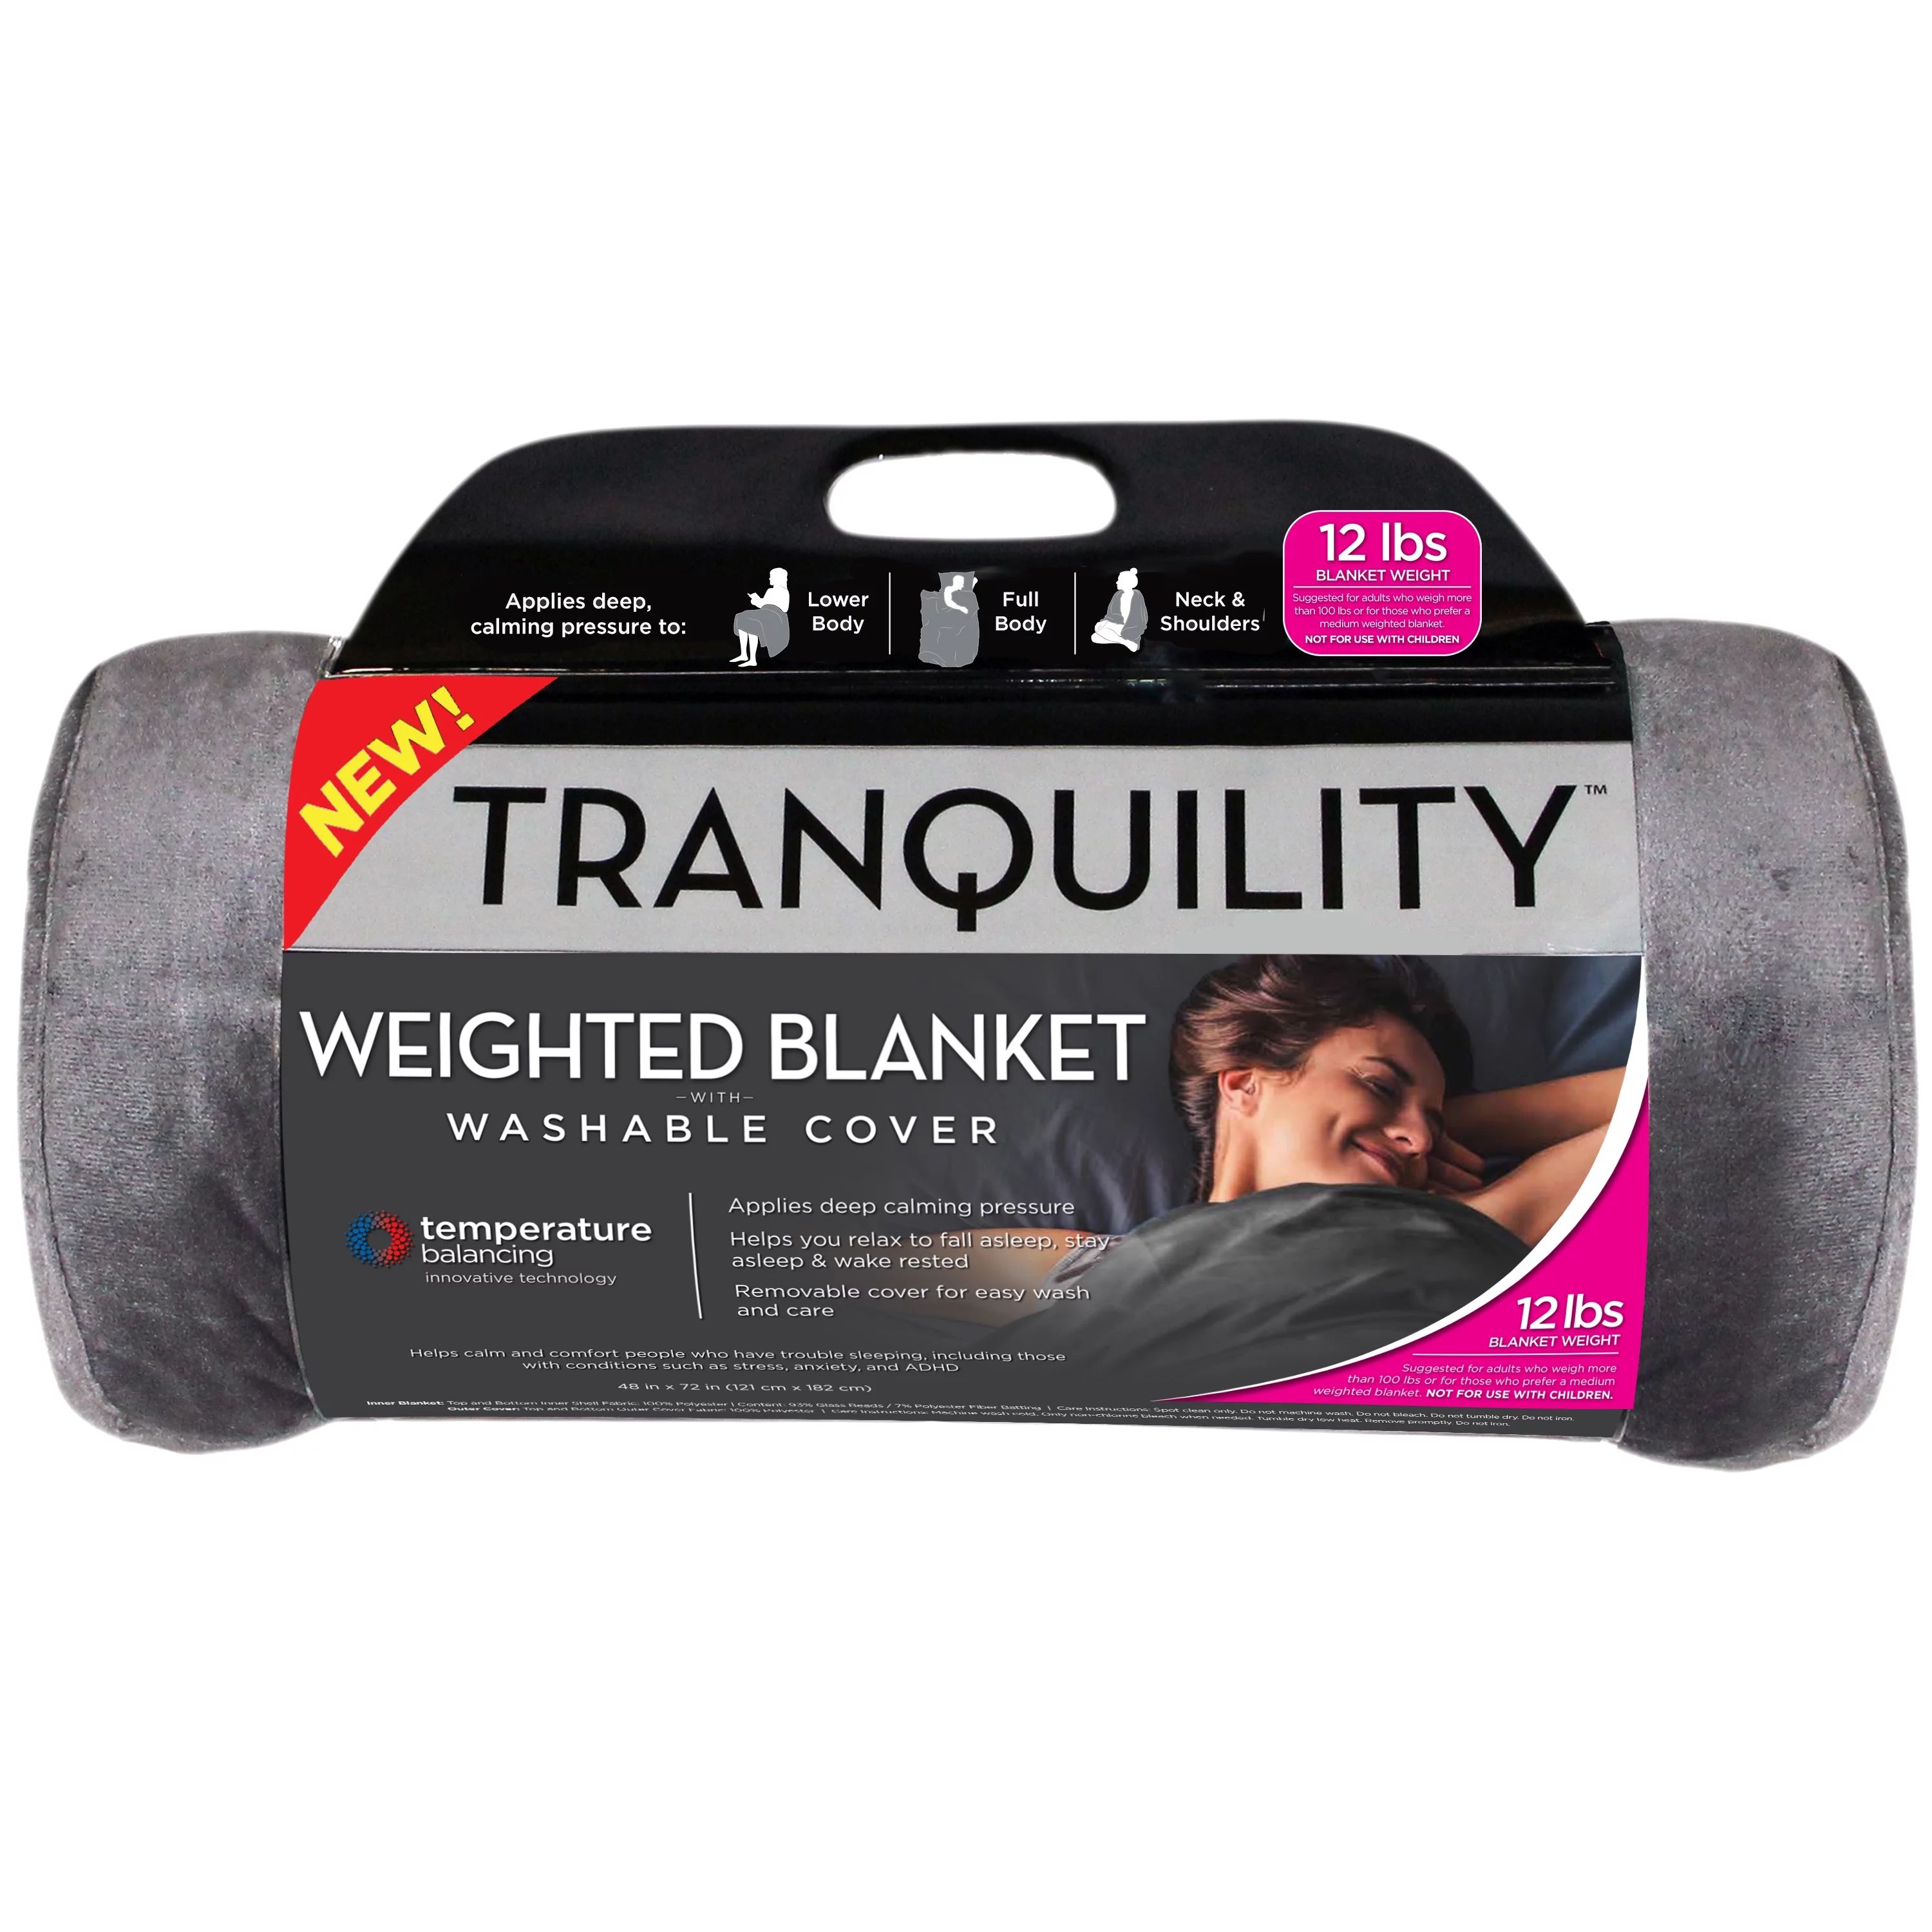 Tranquility Temperature Balancing Weighted Blanket with Washable Cover, 12 lbs | Walmart (US)